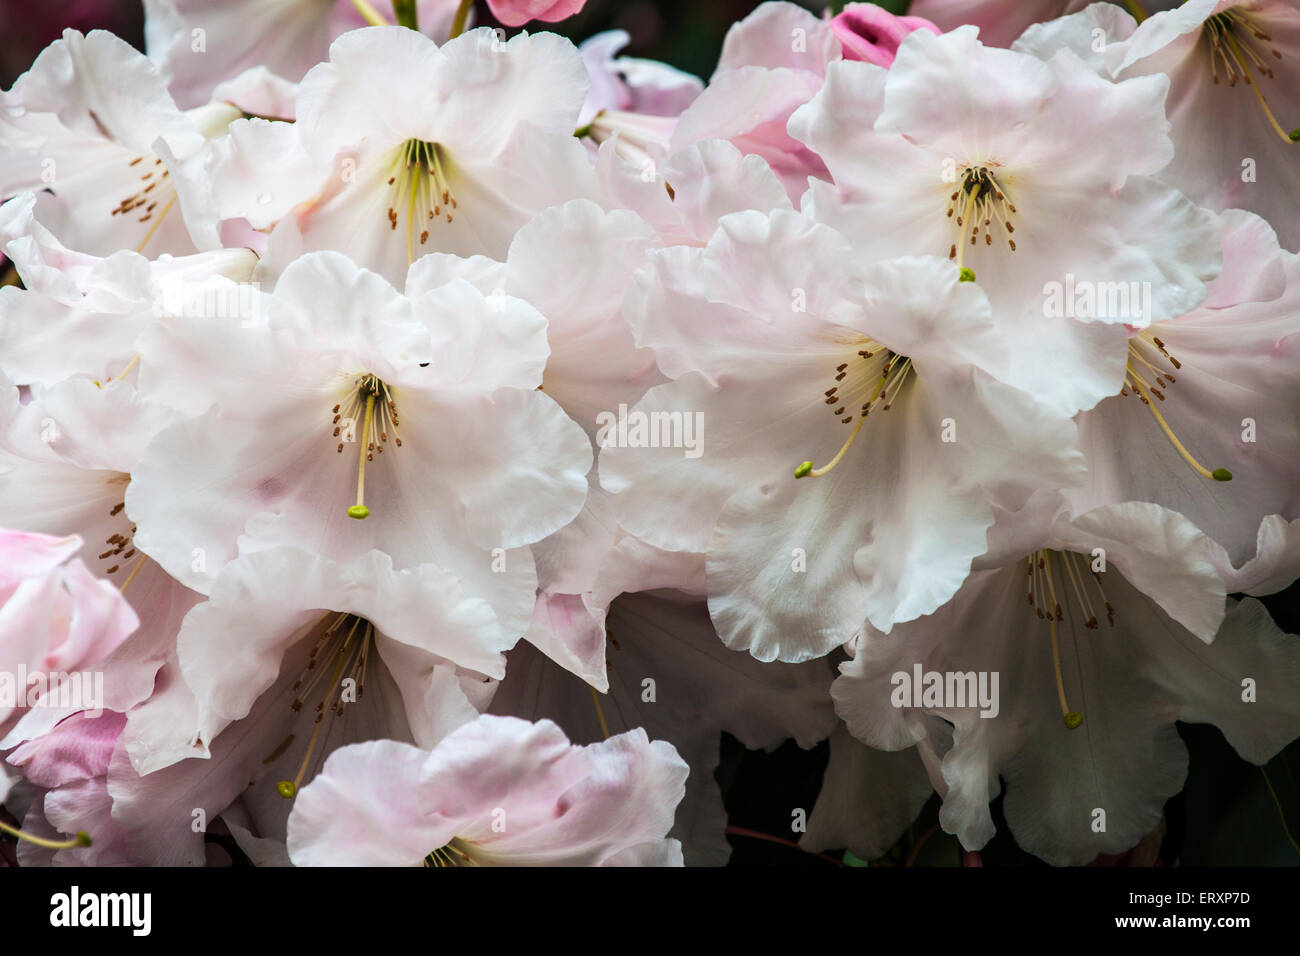 White rhododendron flowers in full bloom. Stock Photo